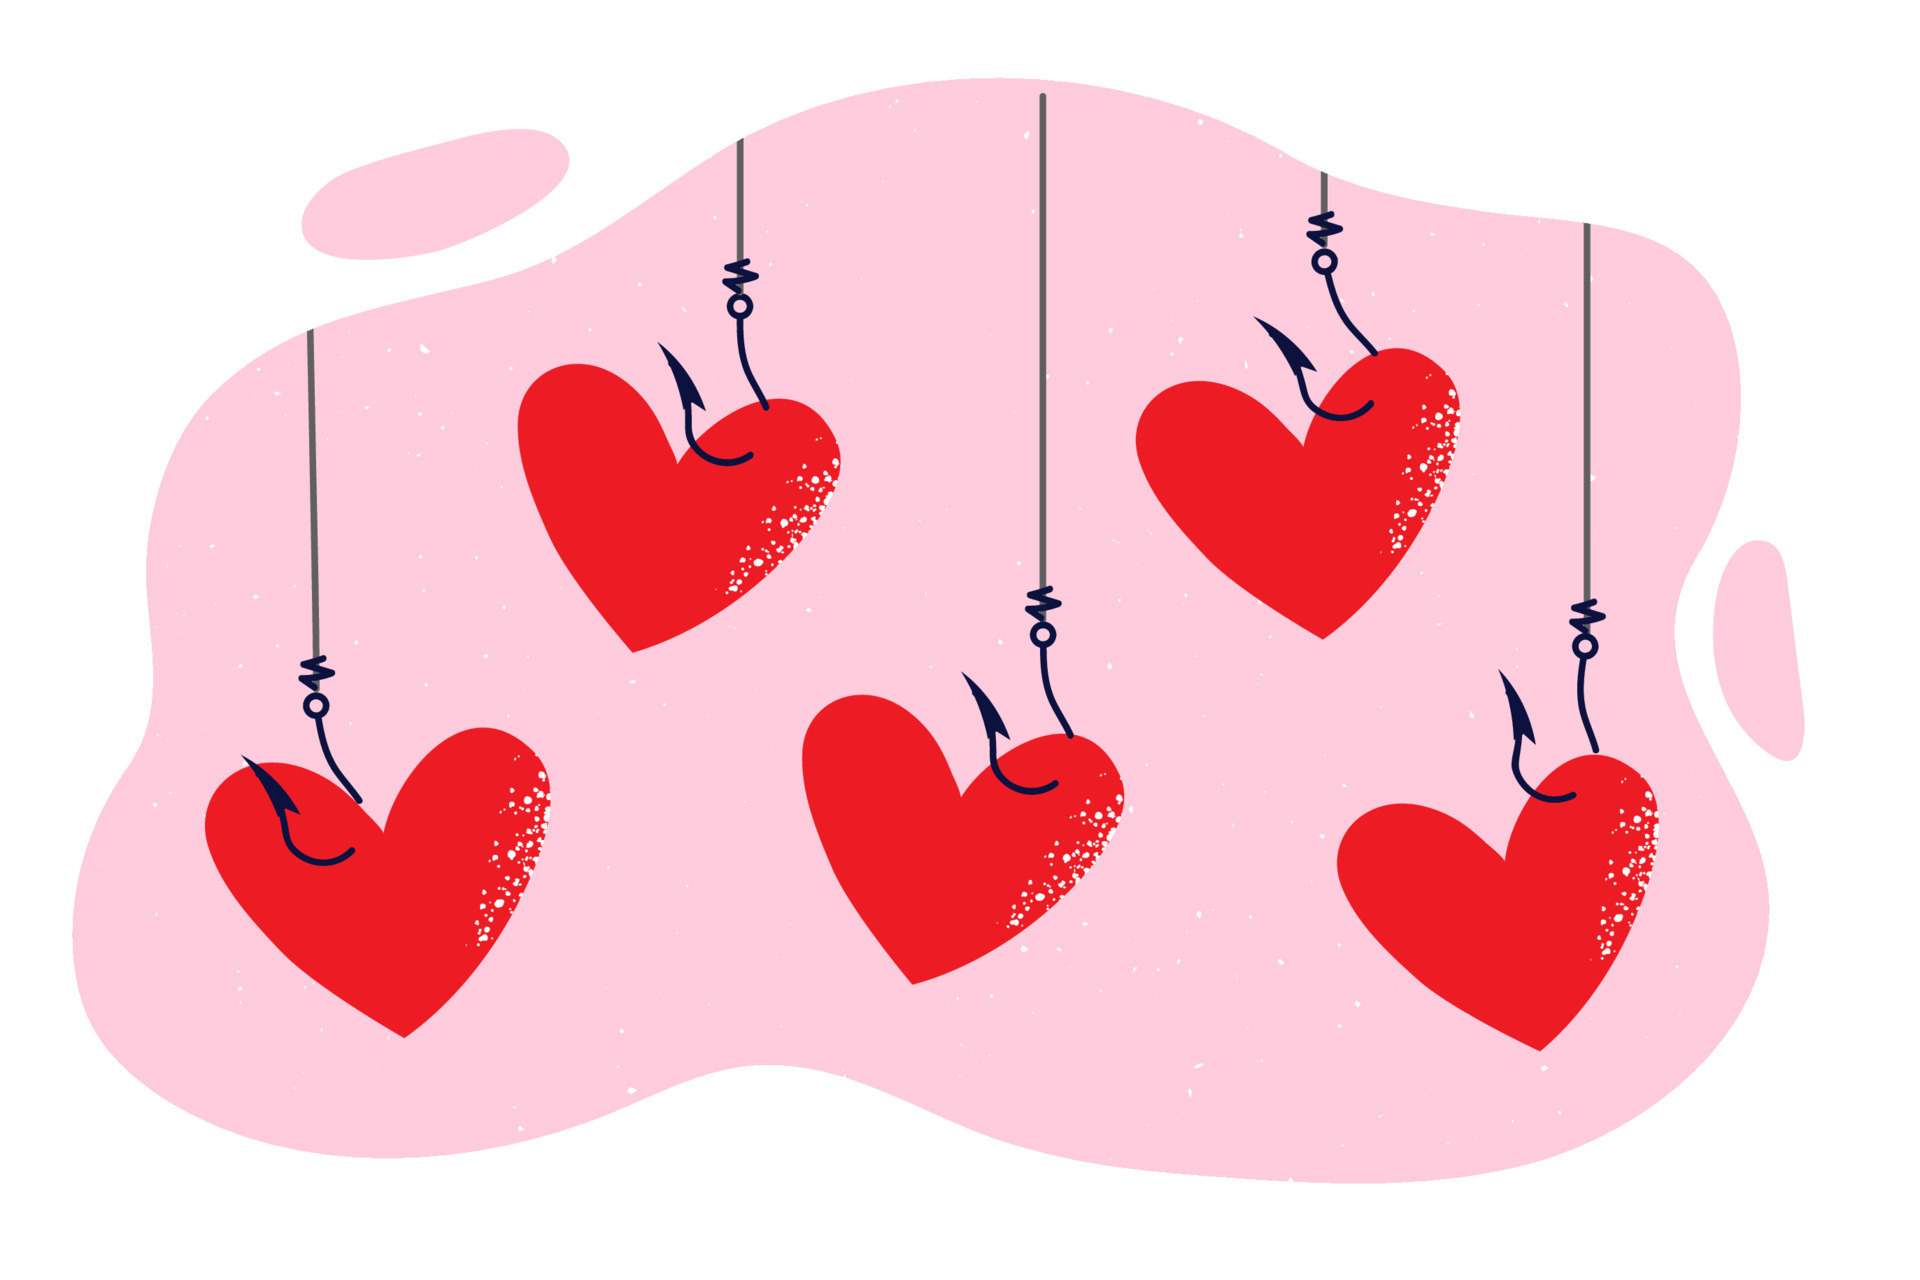 Red hearts hanging on hooks of fishing rods as metaphor for traps for  people seeking romantic relationships and love connections. concept of  finding soul mate for romantic relationships and marriage 22050382 Vector